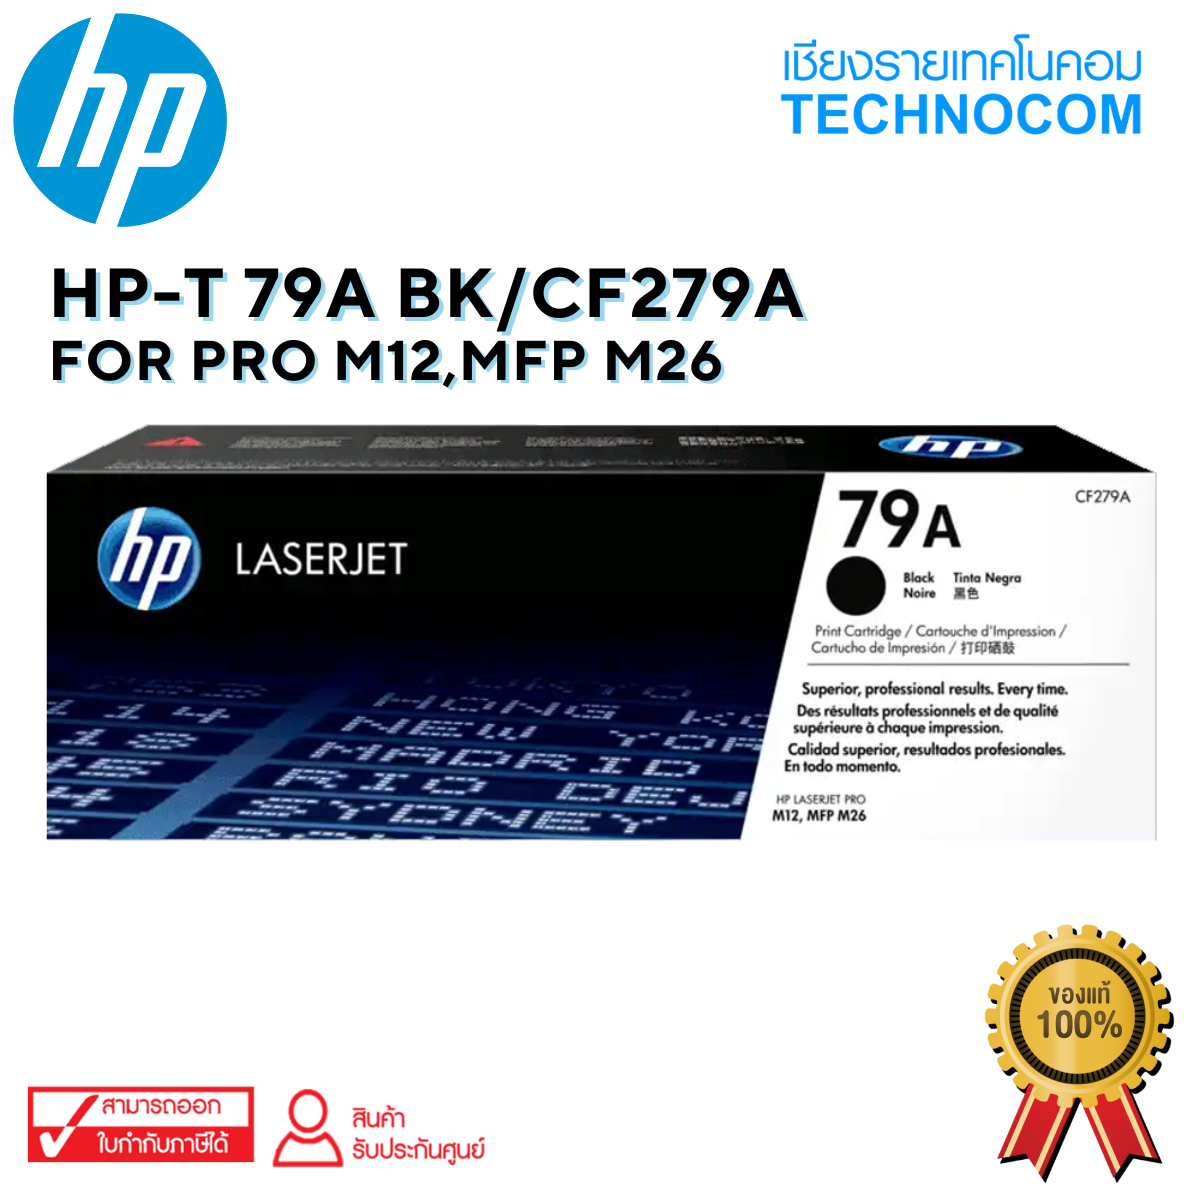 HP-T 79A BK/CF279A for PRO M12,MFP M26